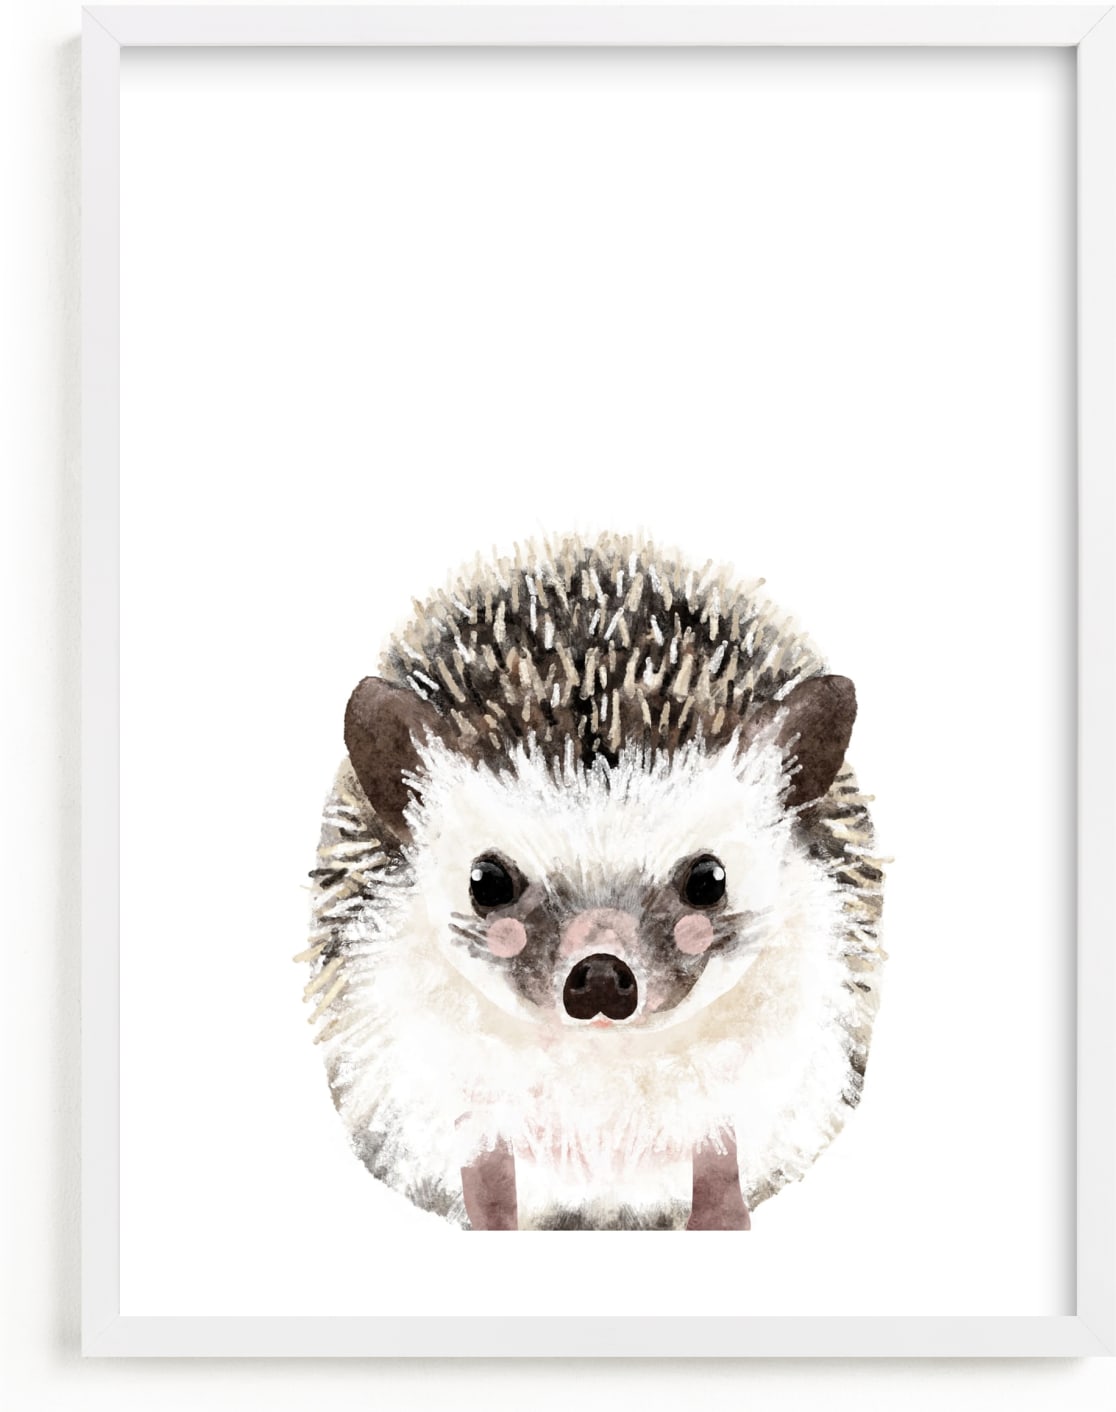 This is a brown art by Cass Loh called Baby Hedgehog.